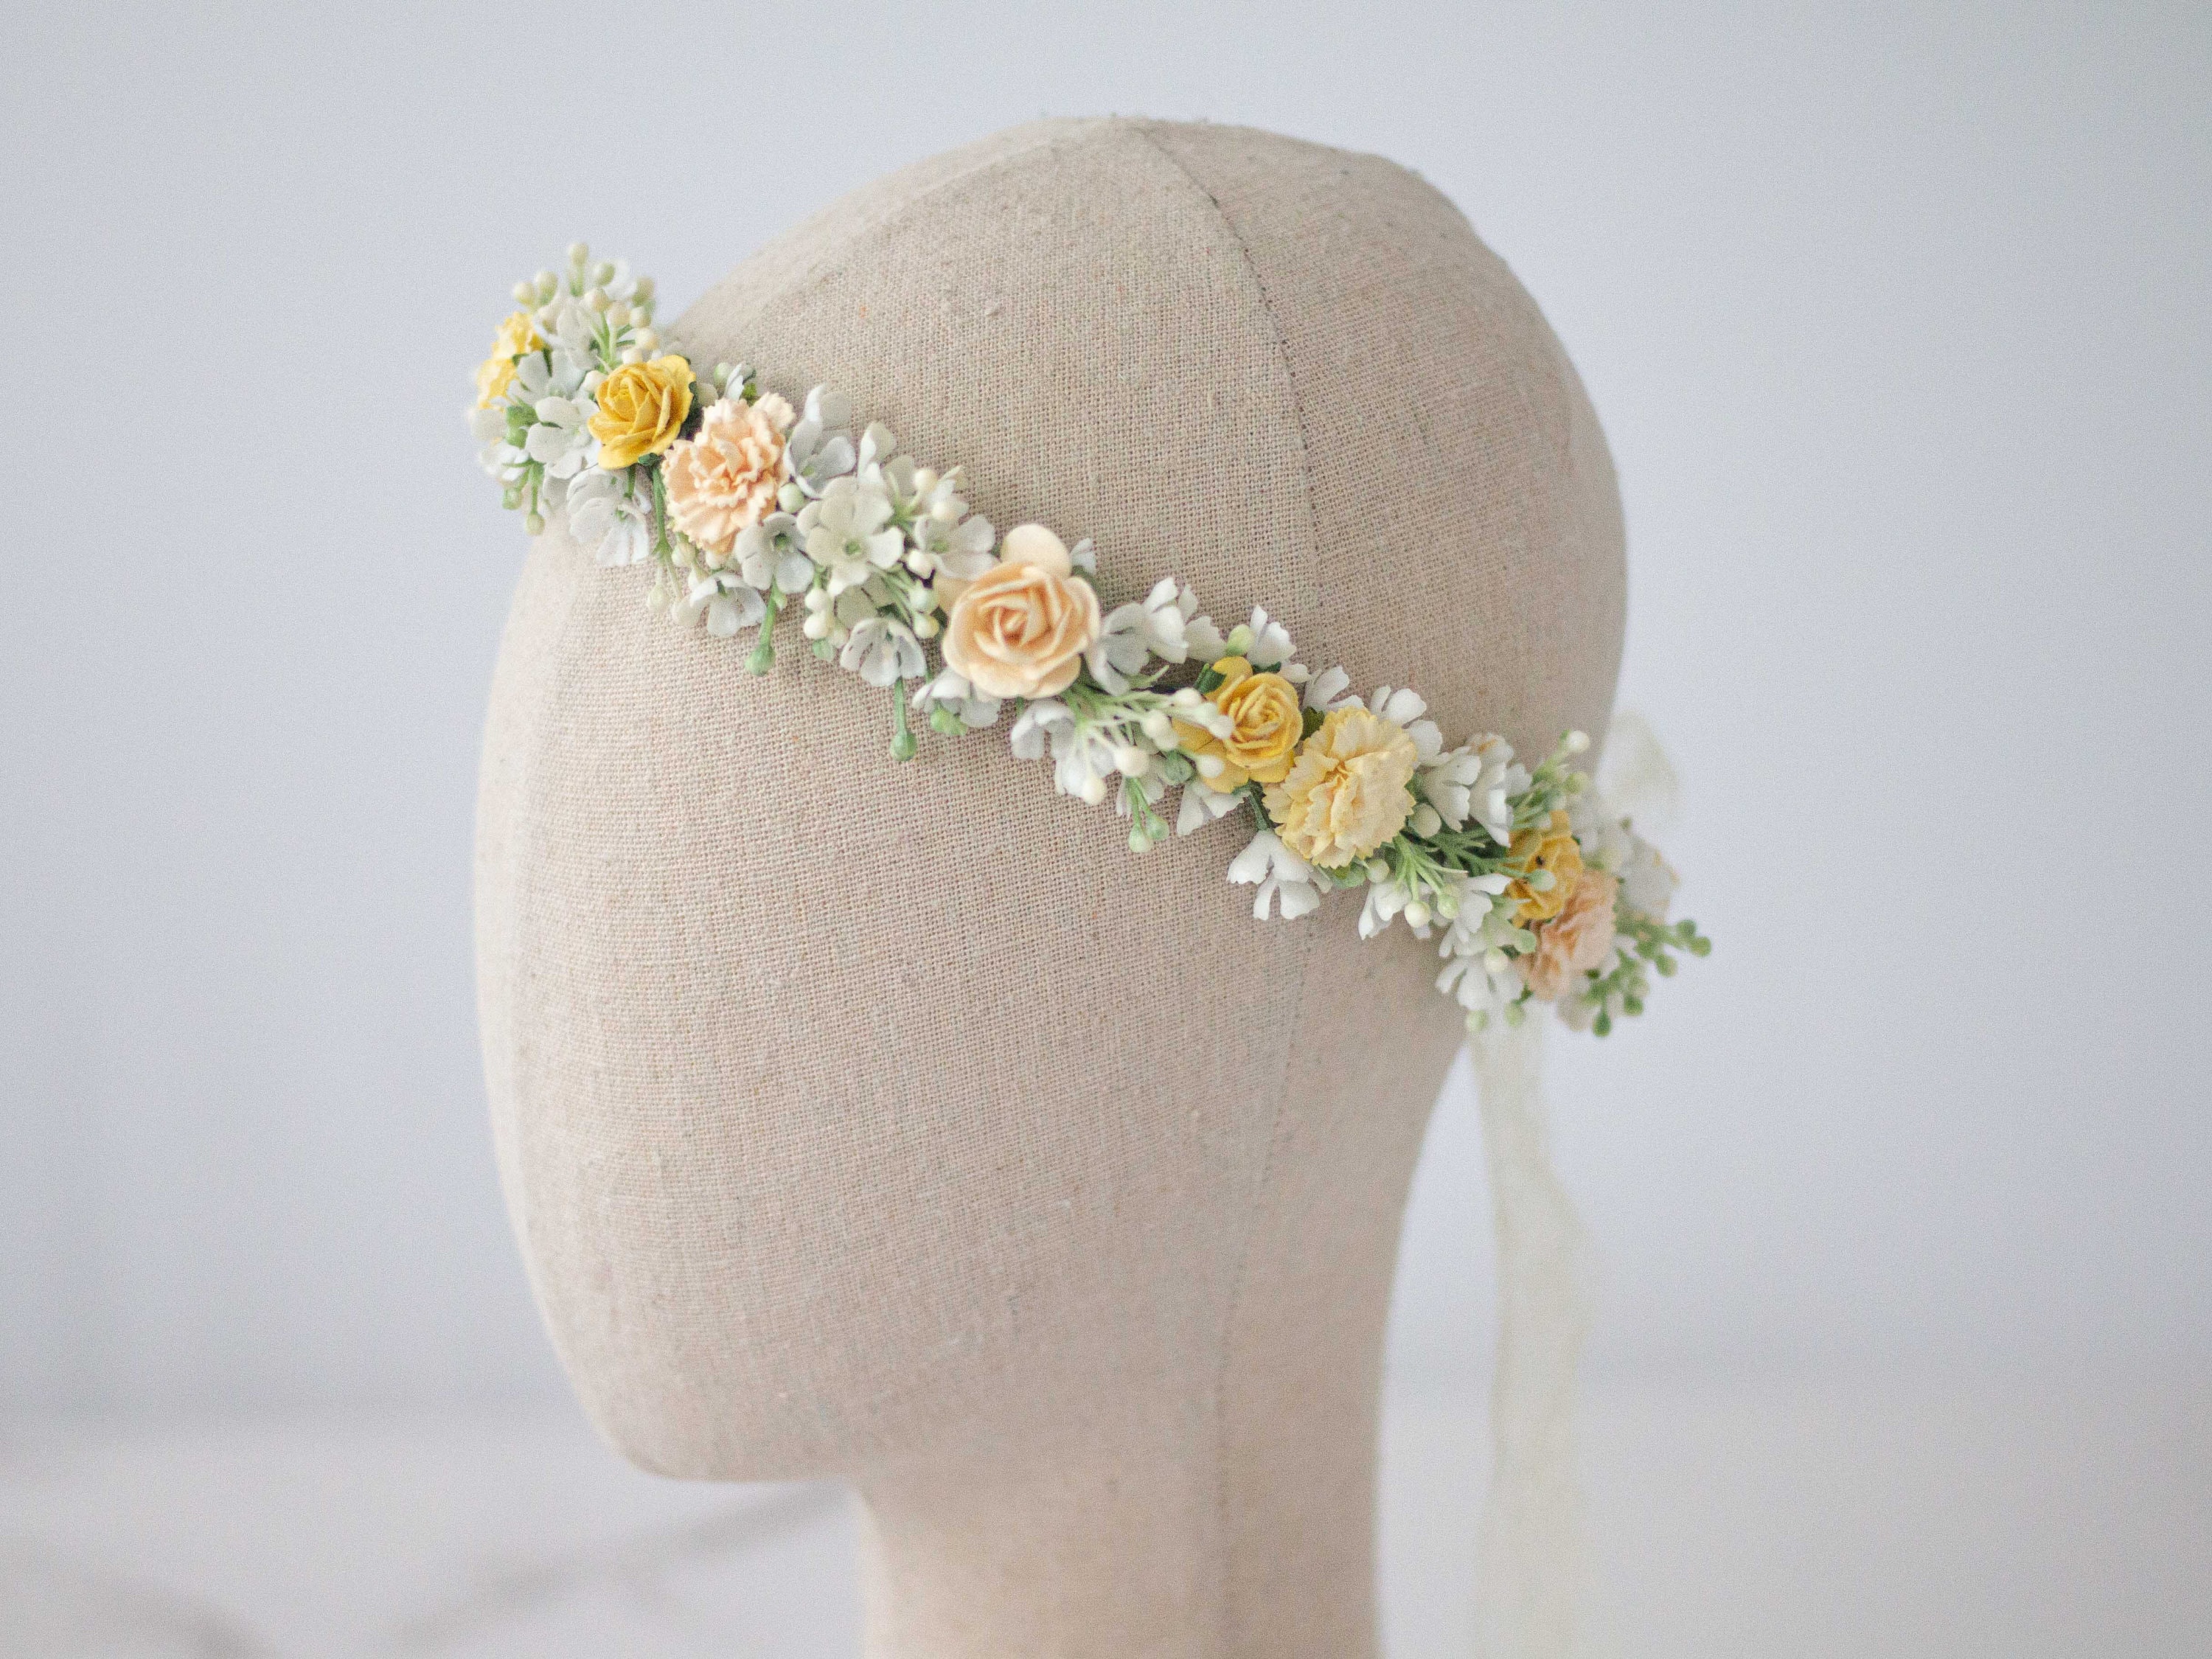 Yellow and Peach Flower Crown Kit, DIY Flower Crown, Make Your Own Crown,  Kid's Crown Activity, Bachelorette Party, Hen Party, DIY Wedding 